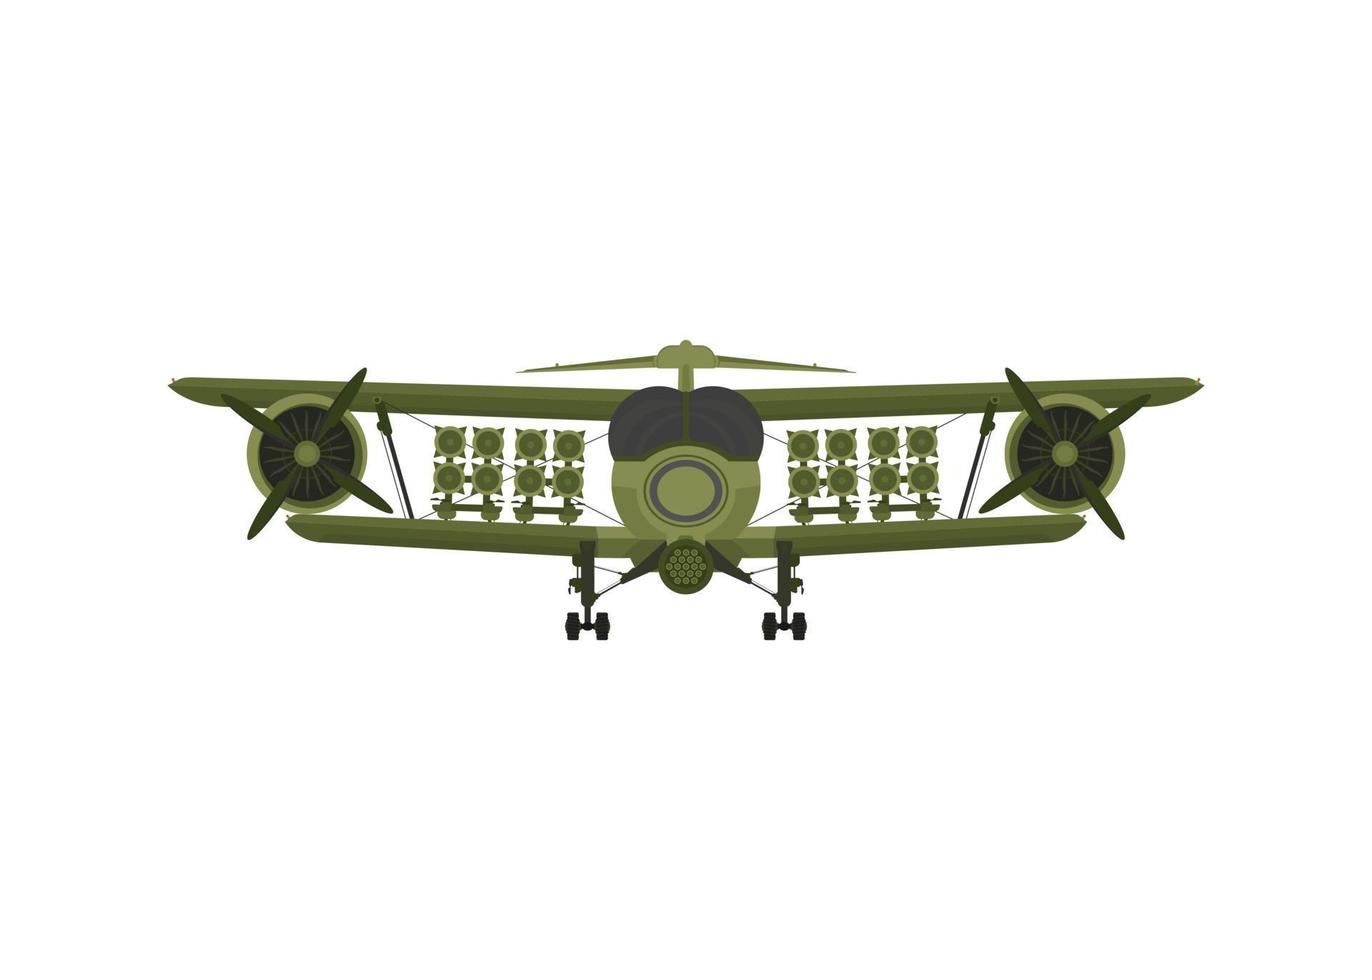 Fighter, military aircraft with missiles on board. Illustration isolated on white background. vector